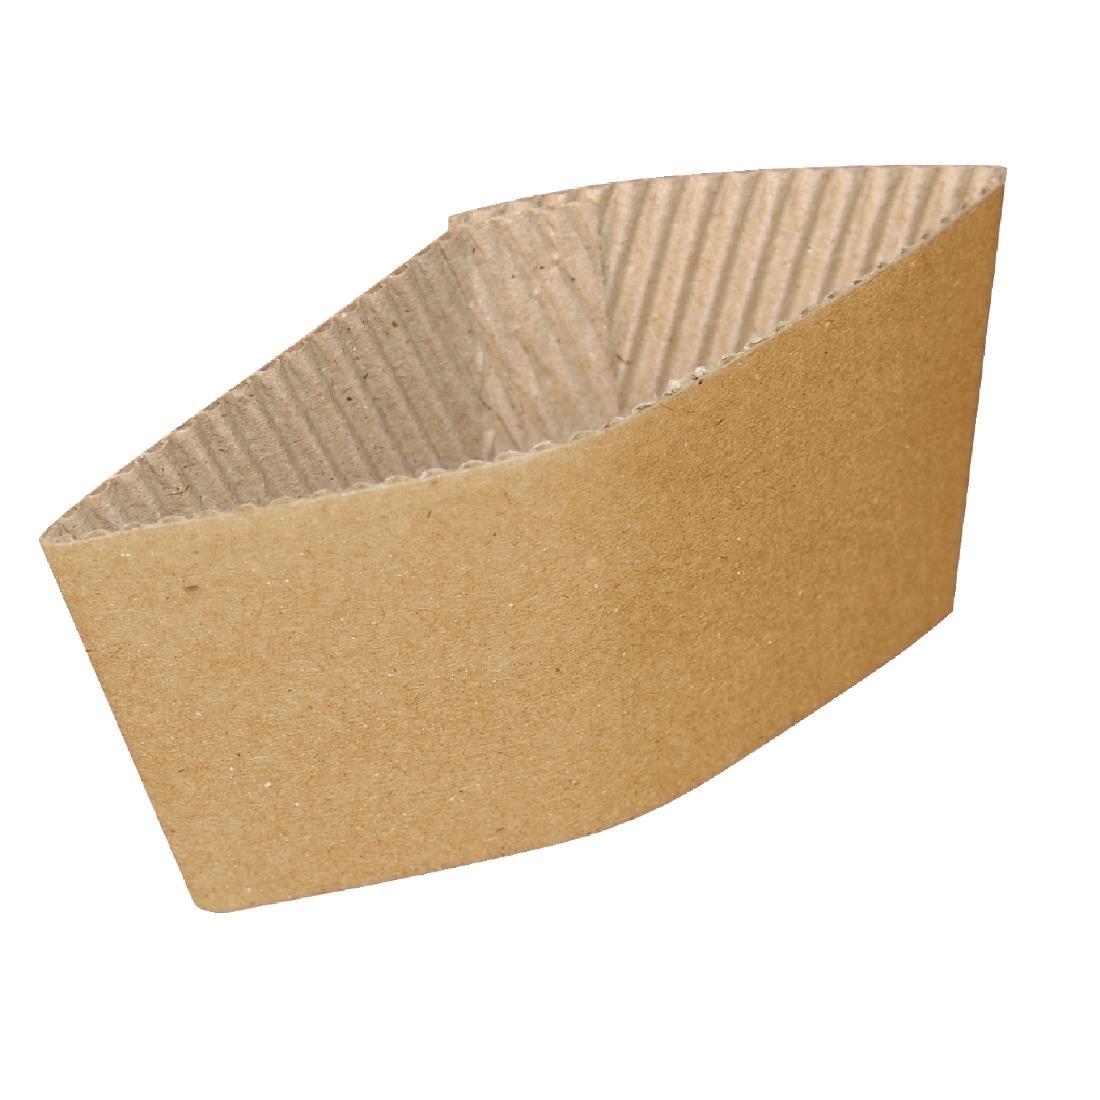 Corrugated Cup Sleeves for 12/16oz Cups (Pack of 1000) - GD329  - 1